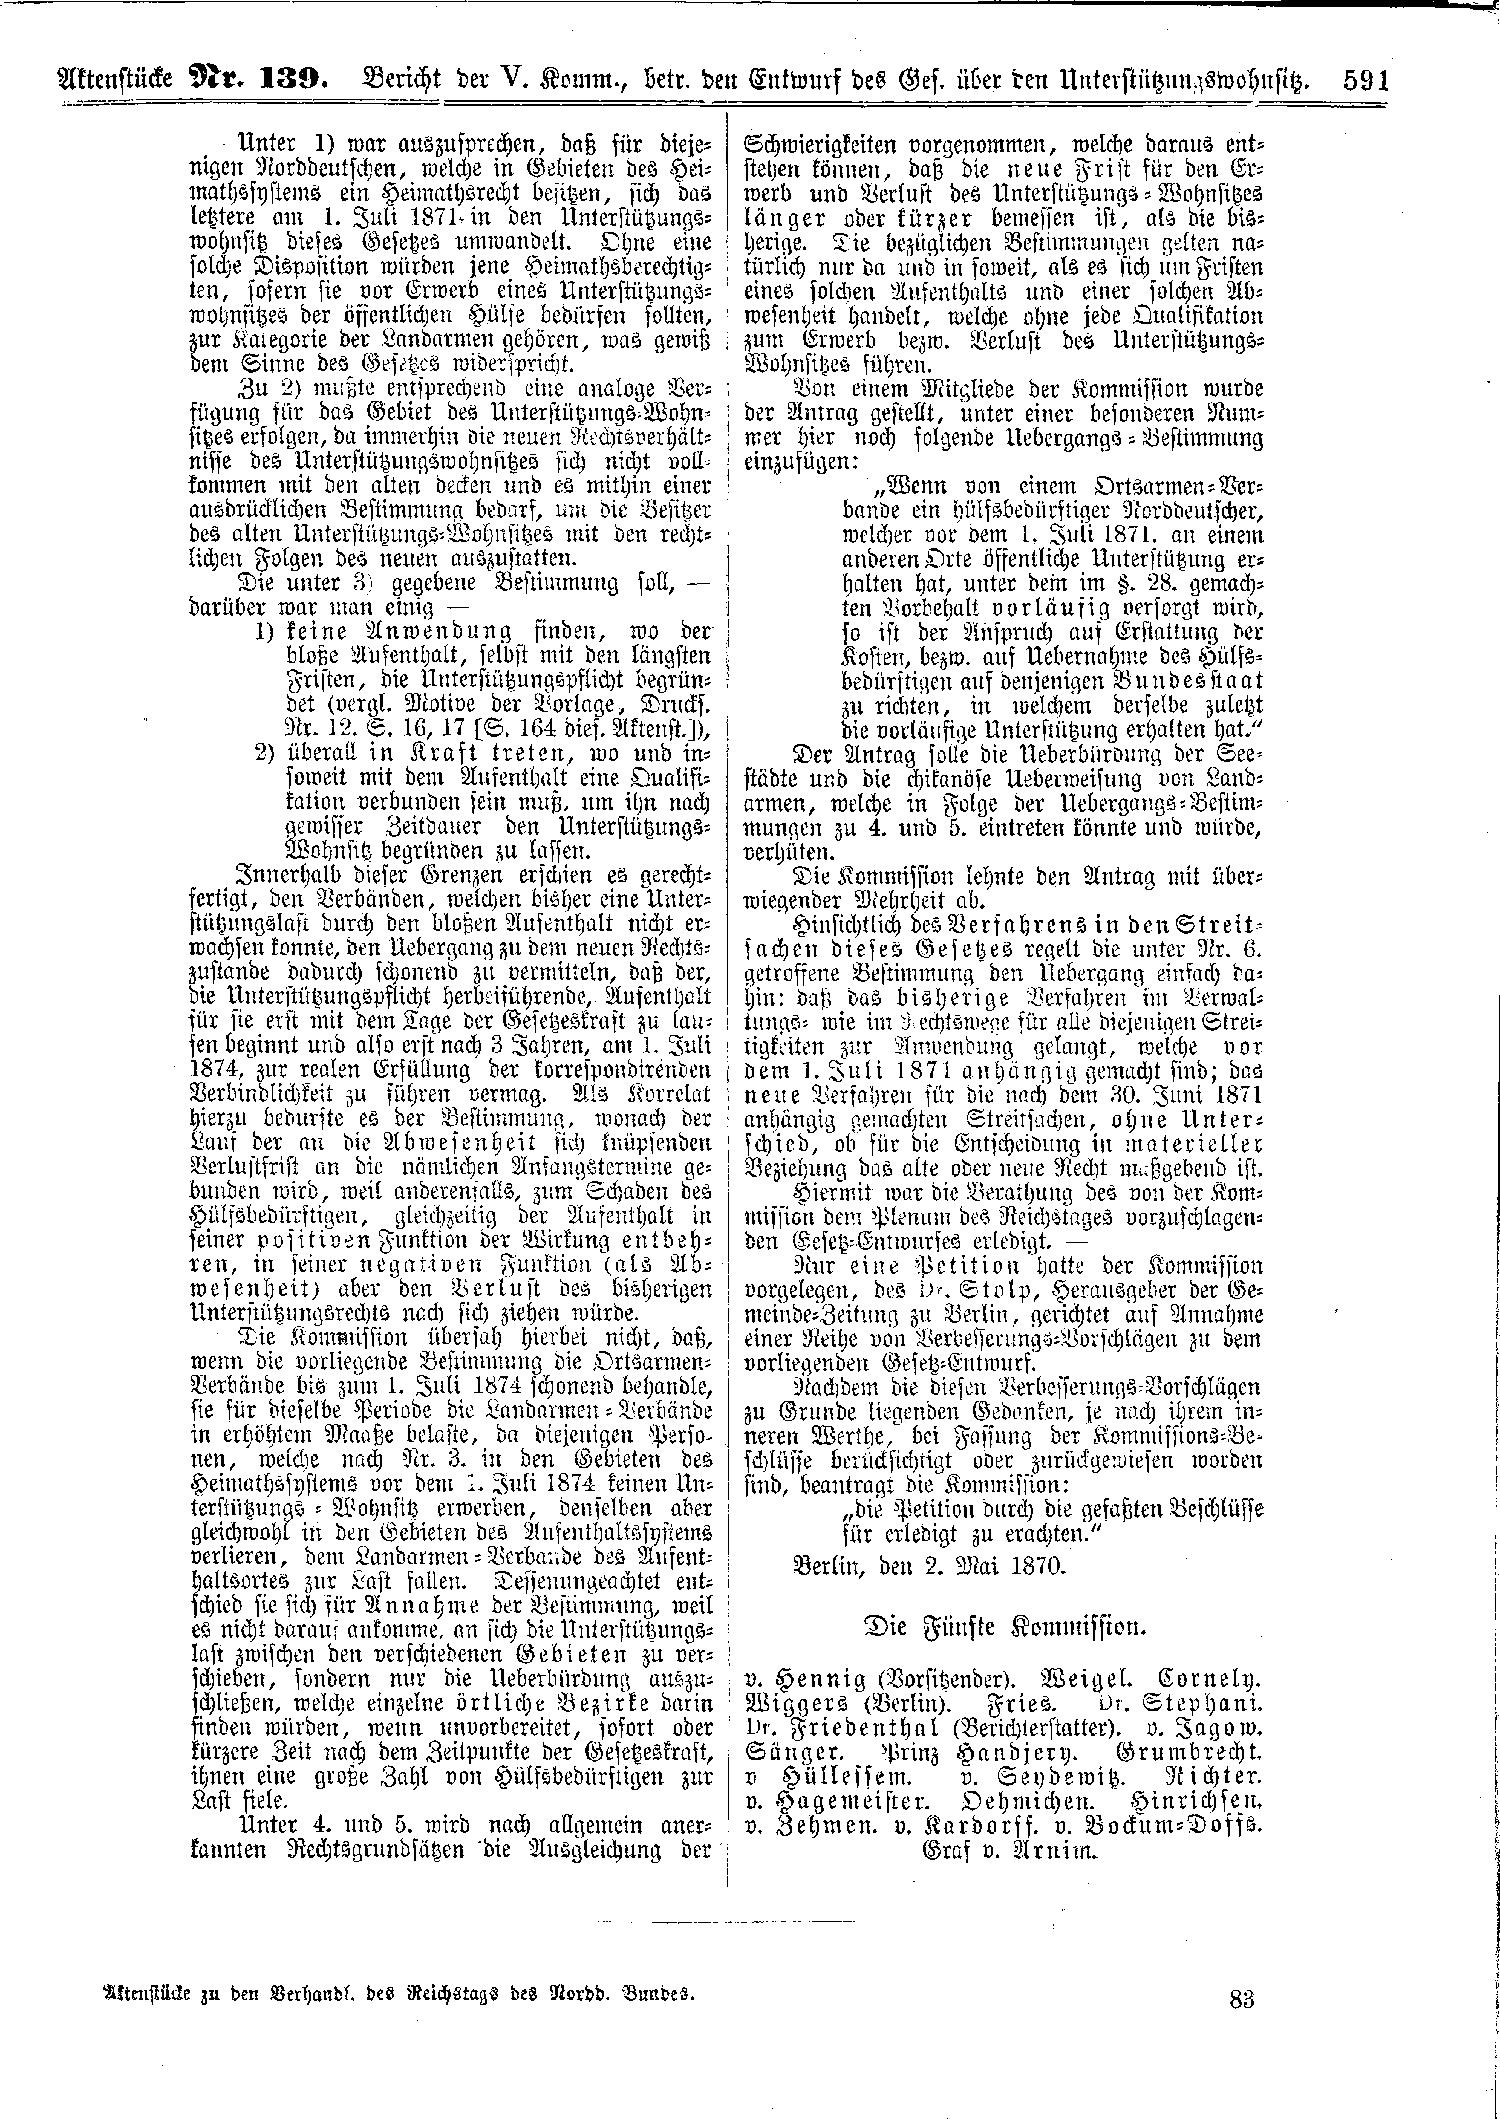 Scan of page 591